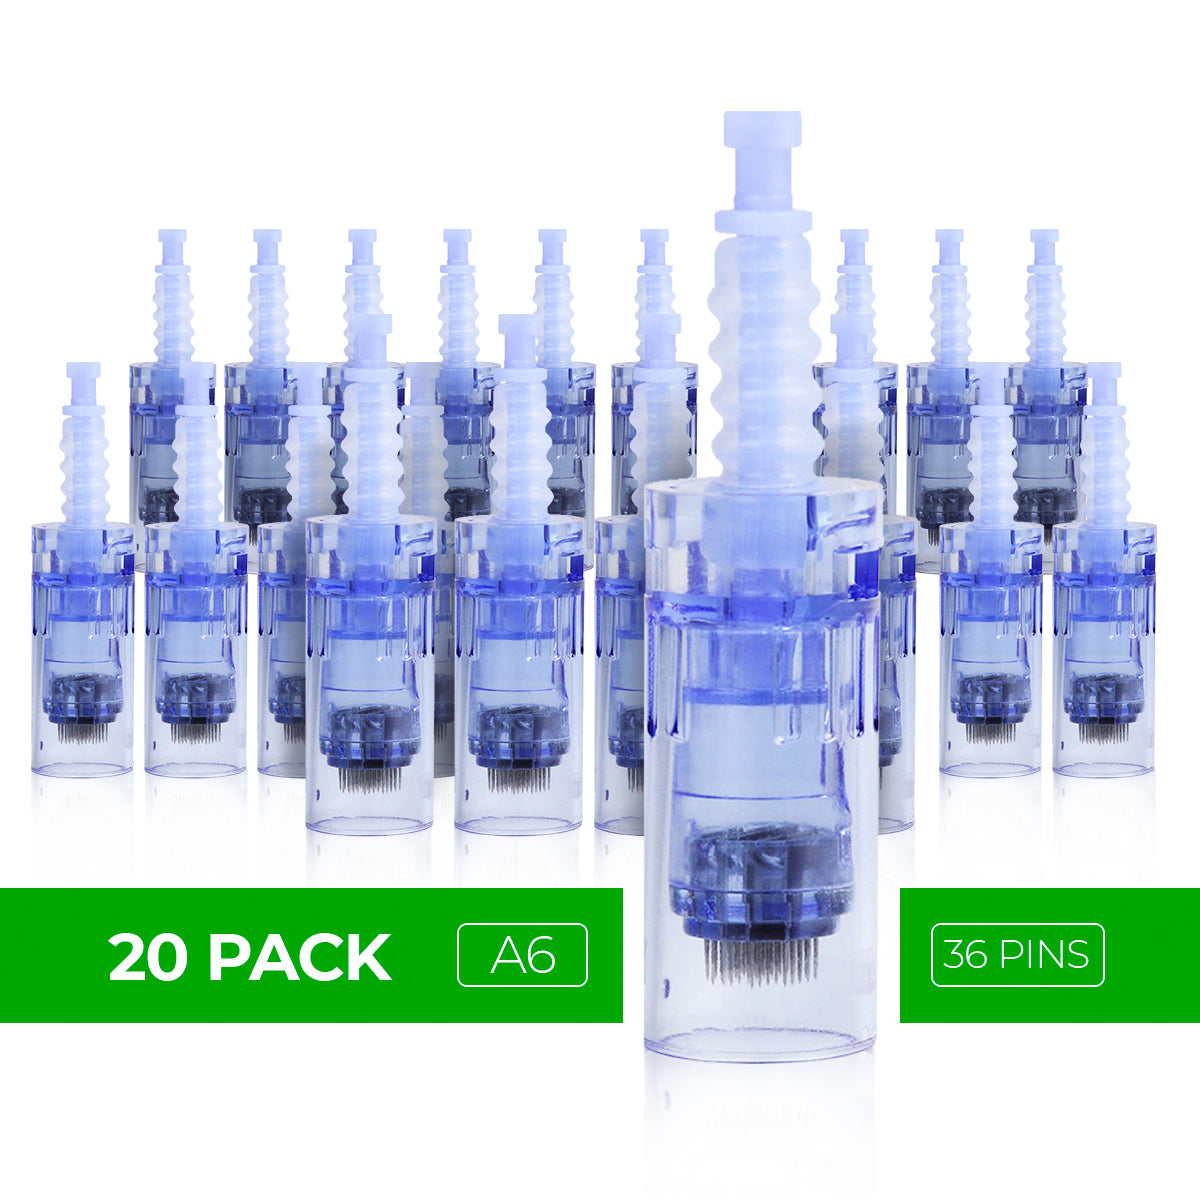 Dr. Pen Ultima A6 Replacement Cartridges - (20 Pack) - 36 Pins Bayonet Slot - Disposable Replacement Parts